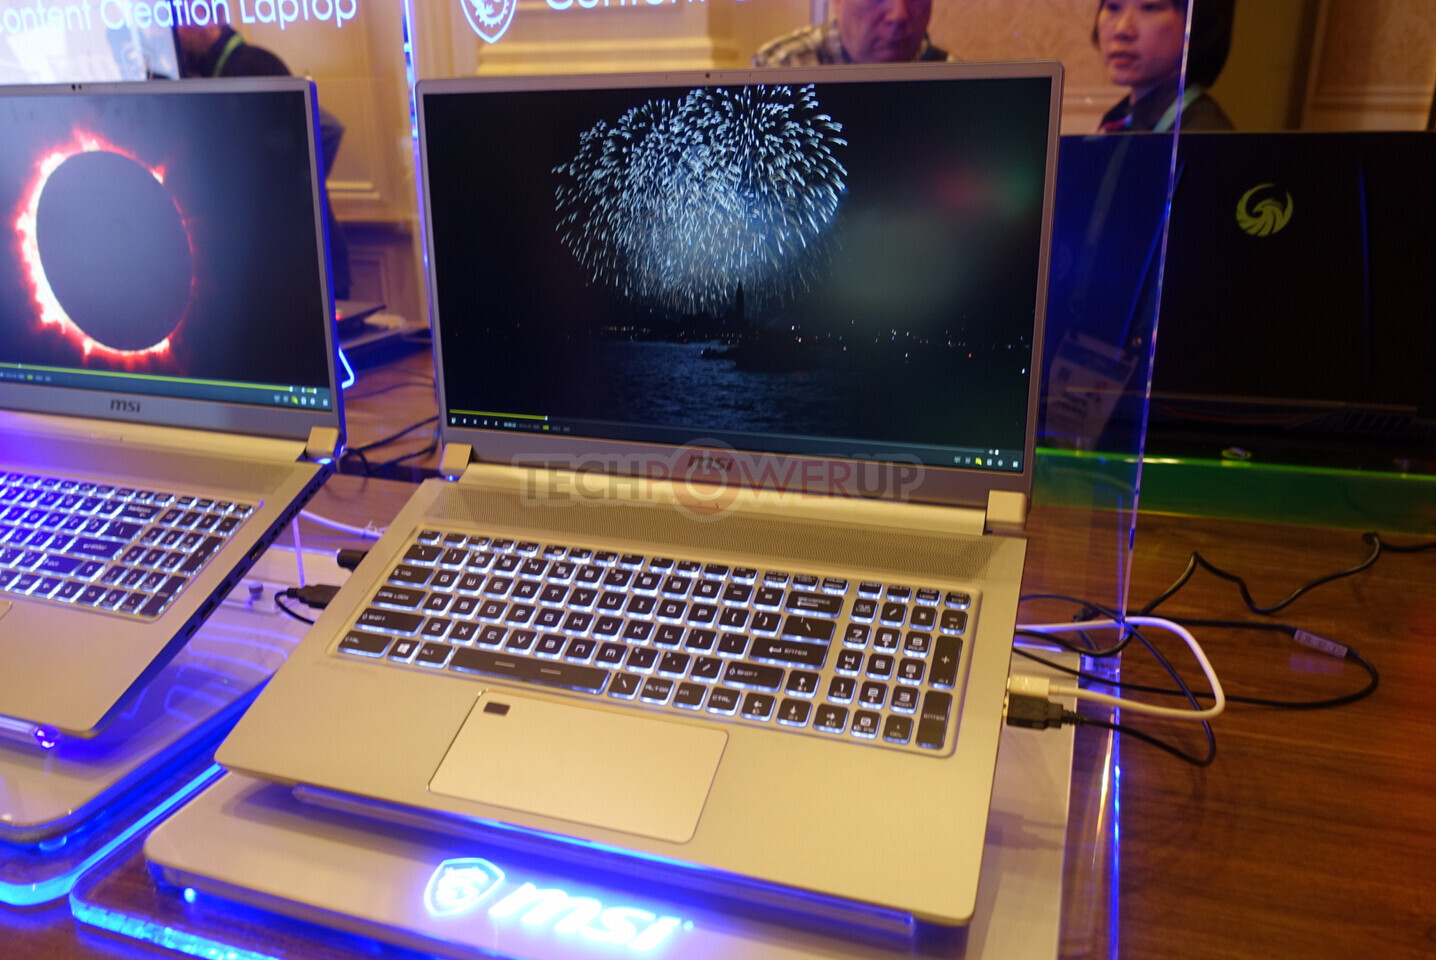 How mini-LED displays benefit content creators: A look at the MSI Creator  17 — the world's first laptop with a mini-LED display 